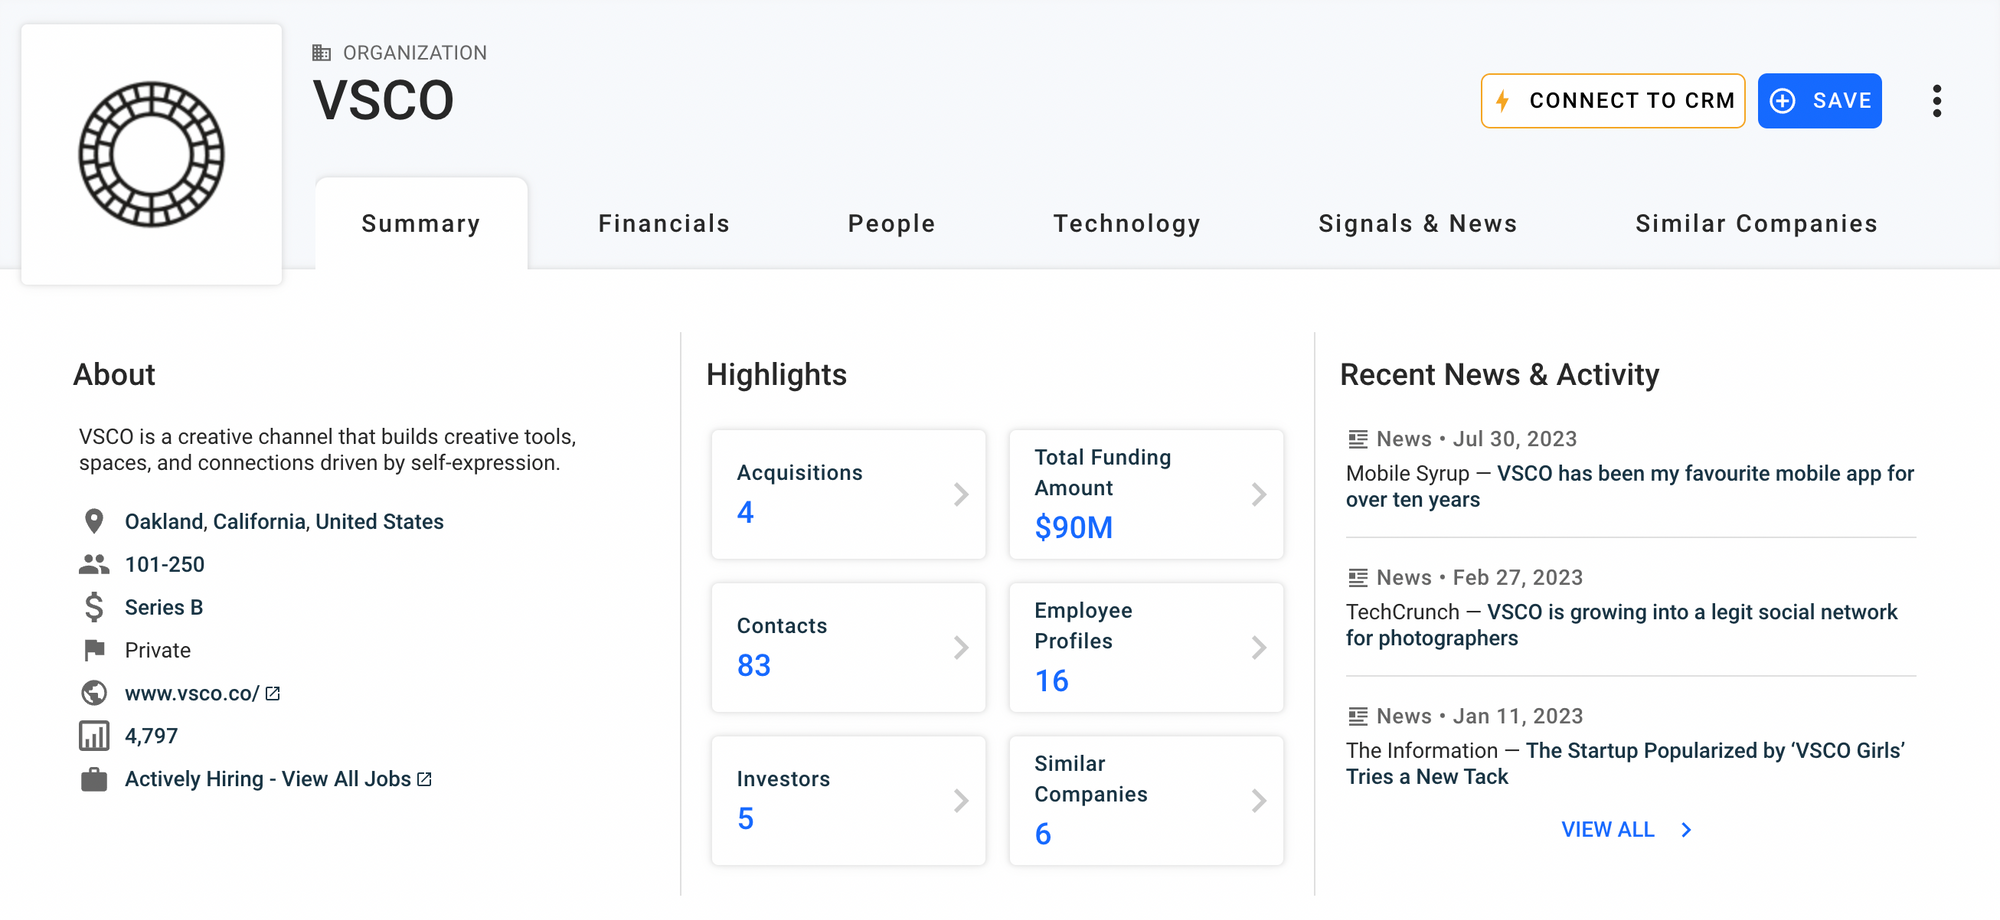 Software Group - Crunchbase Company Profile & Funding